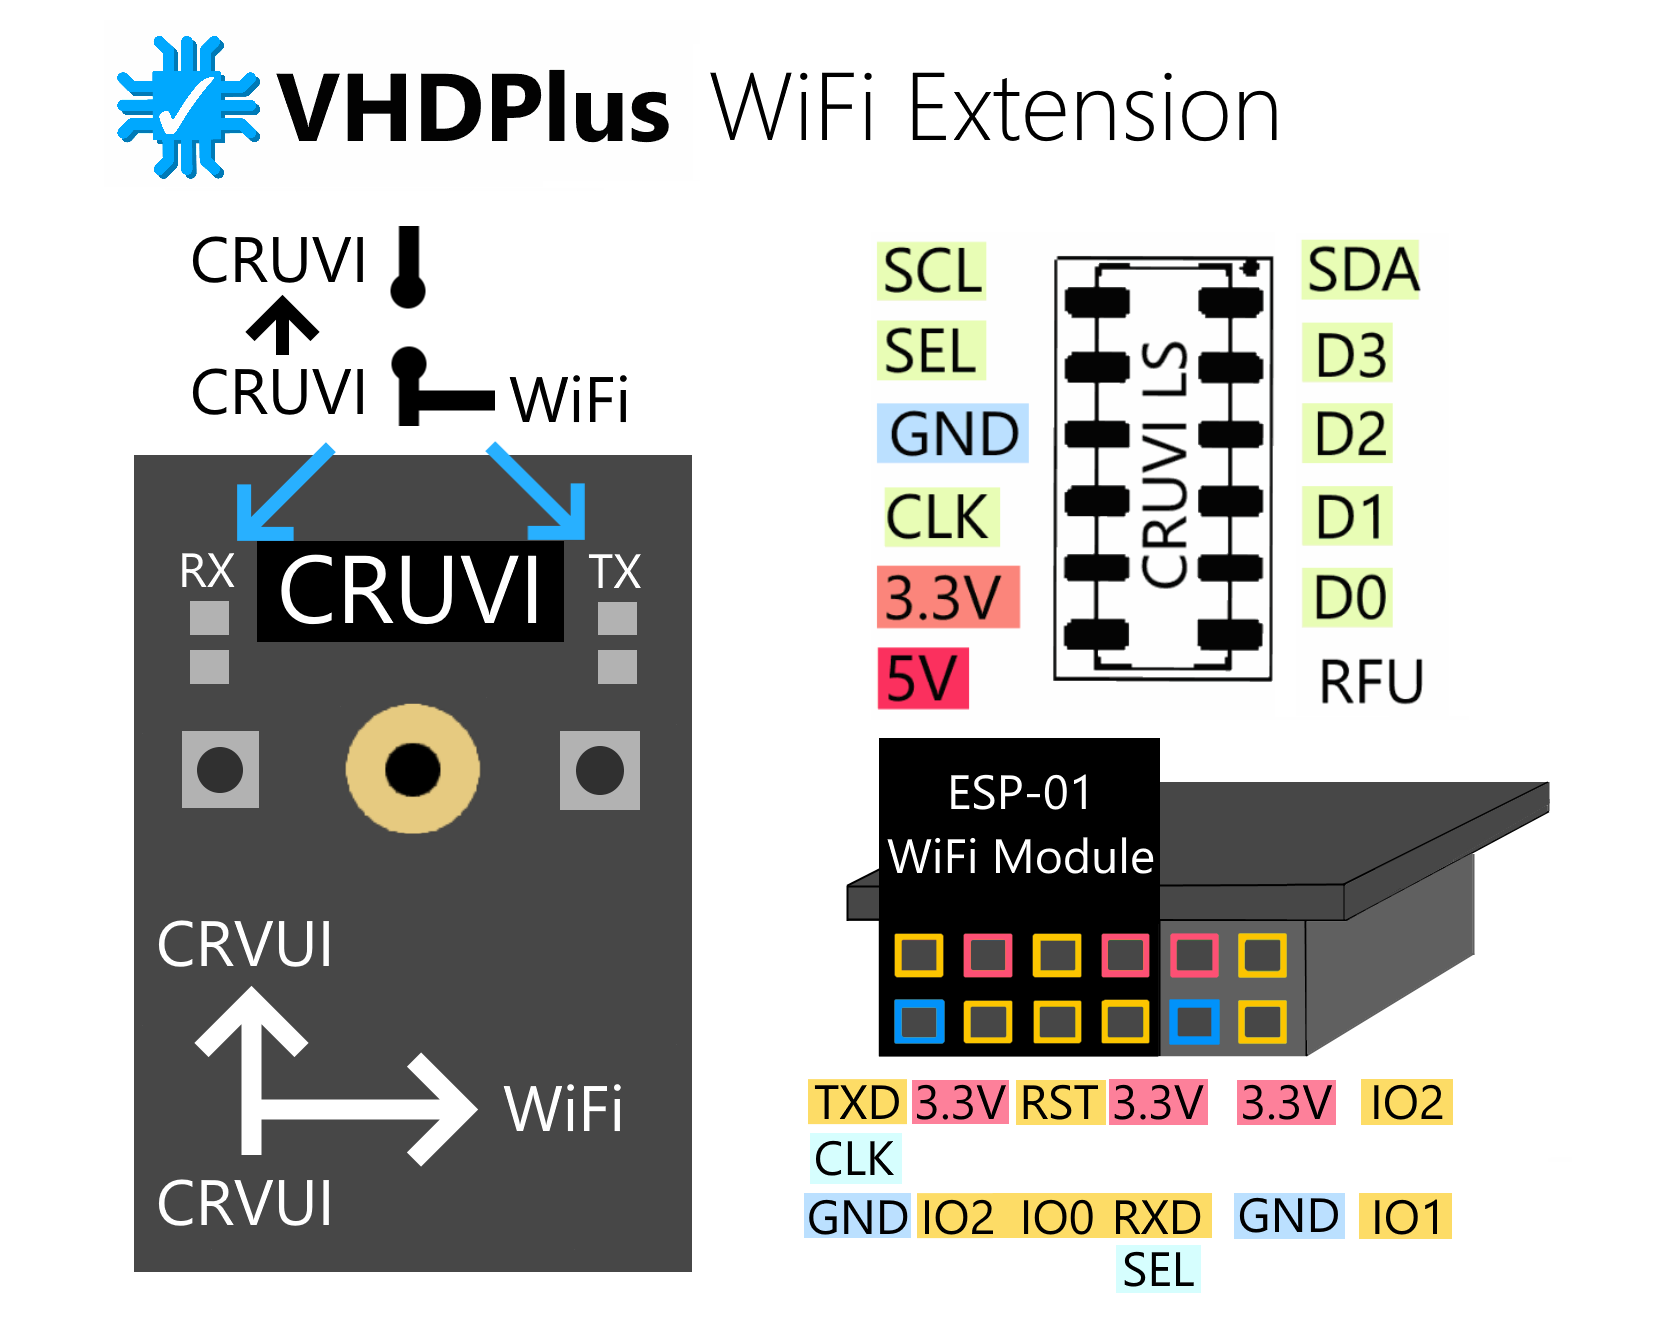 WiFi Overview